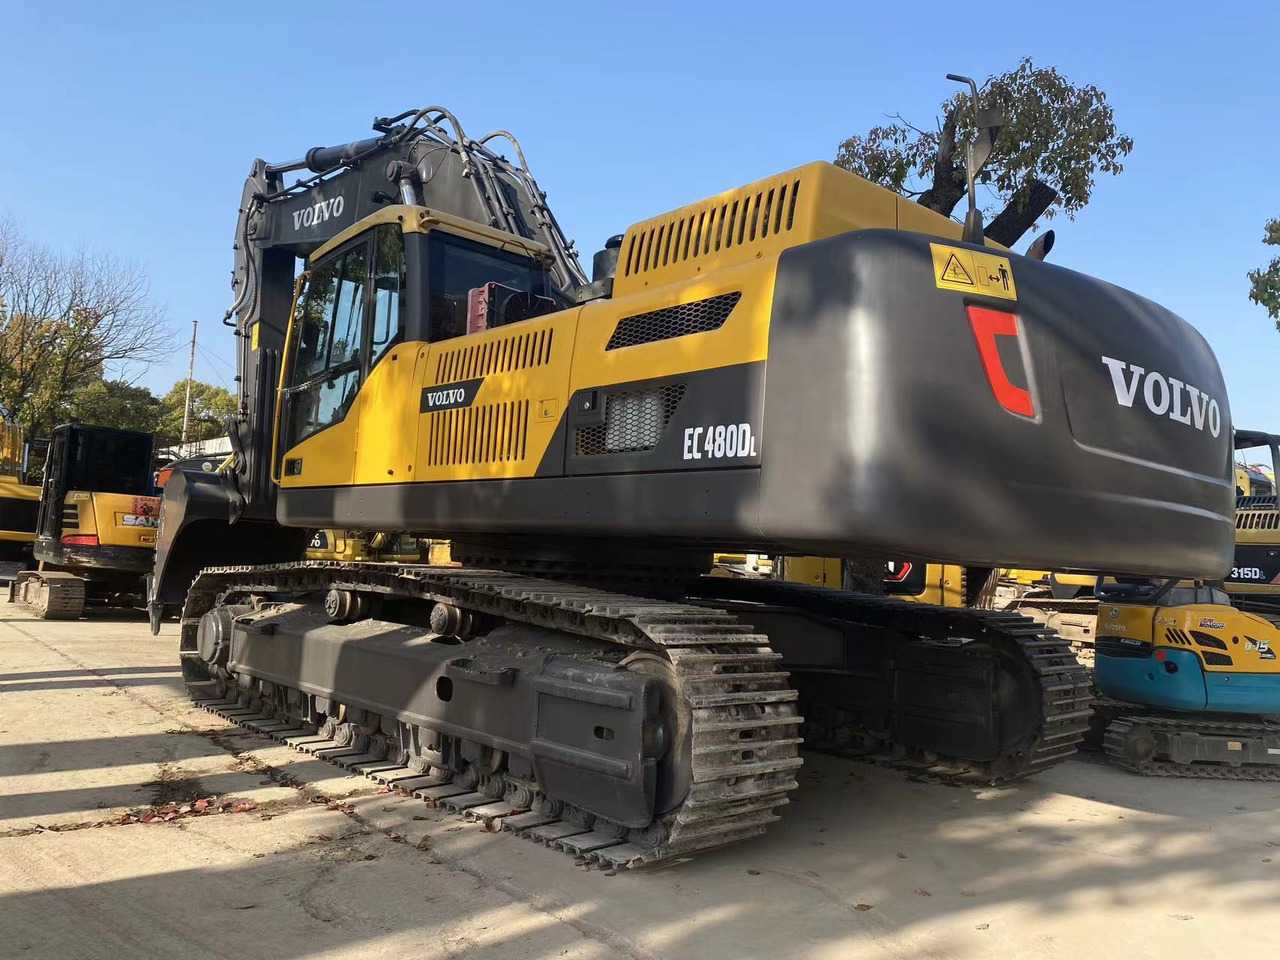 Hot selling original made Used excavator VOLVO EC480DL in stock low price for sale lizingą Hot selling original made Used excavator VOLVO EC480DL in stock low price for sale: foto 6